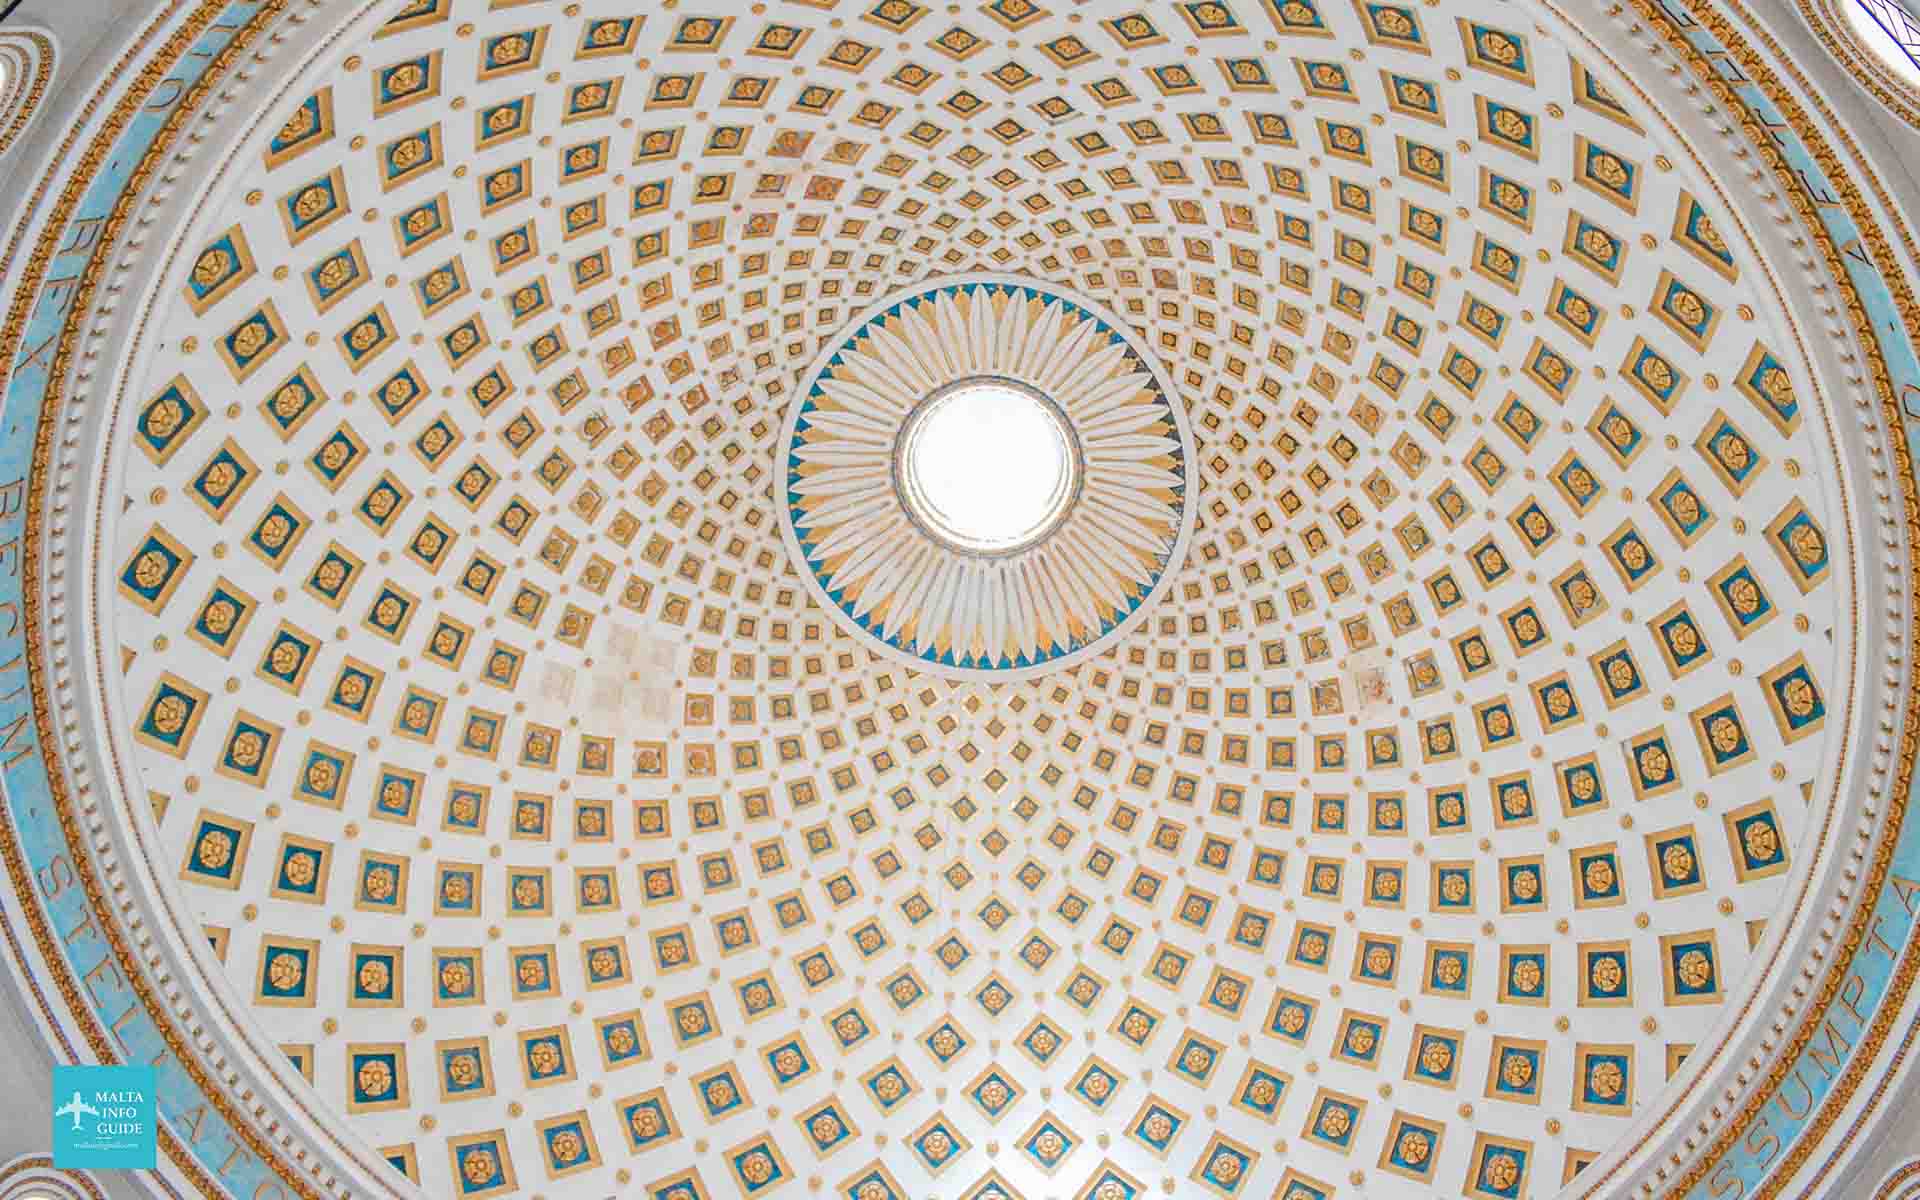 The Dome from inside the Rotunda.